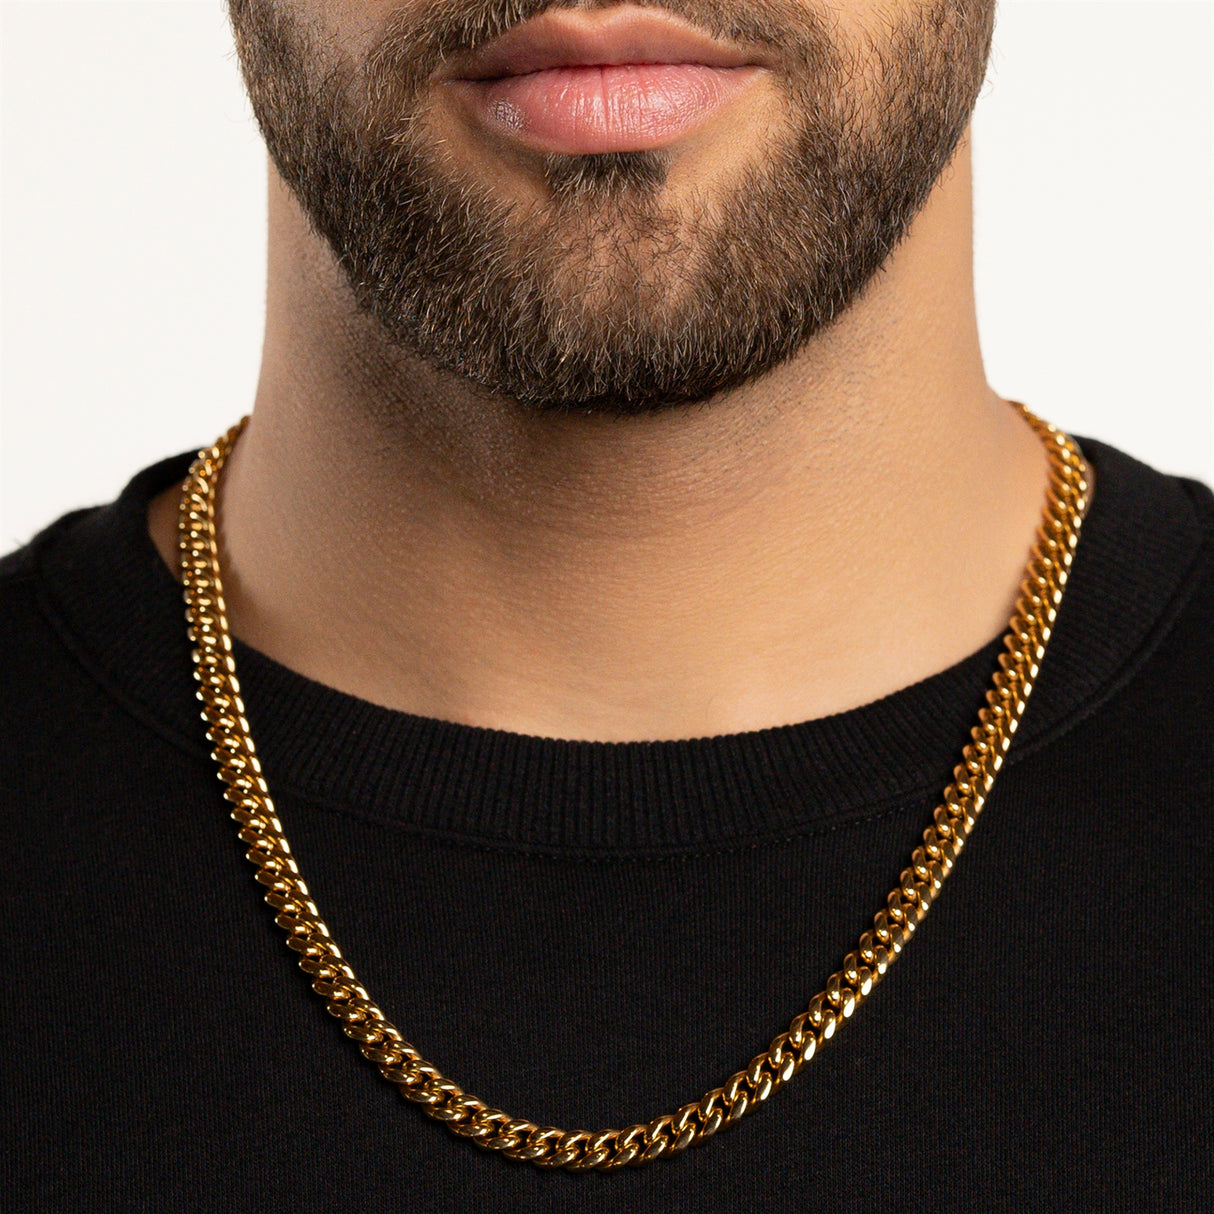 22inch-8mm-gold-plated-miami-cuban-link-chain-on-neck-front-the-gold-gods-mens-jewelry